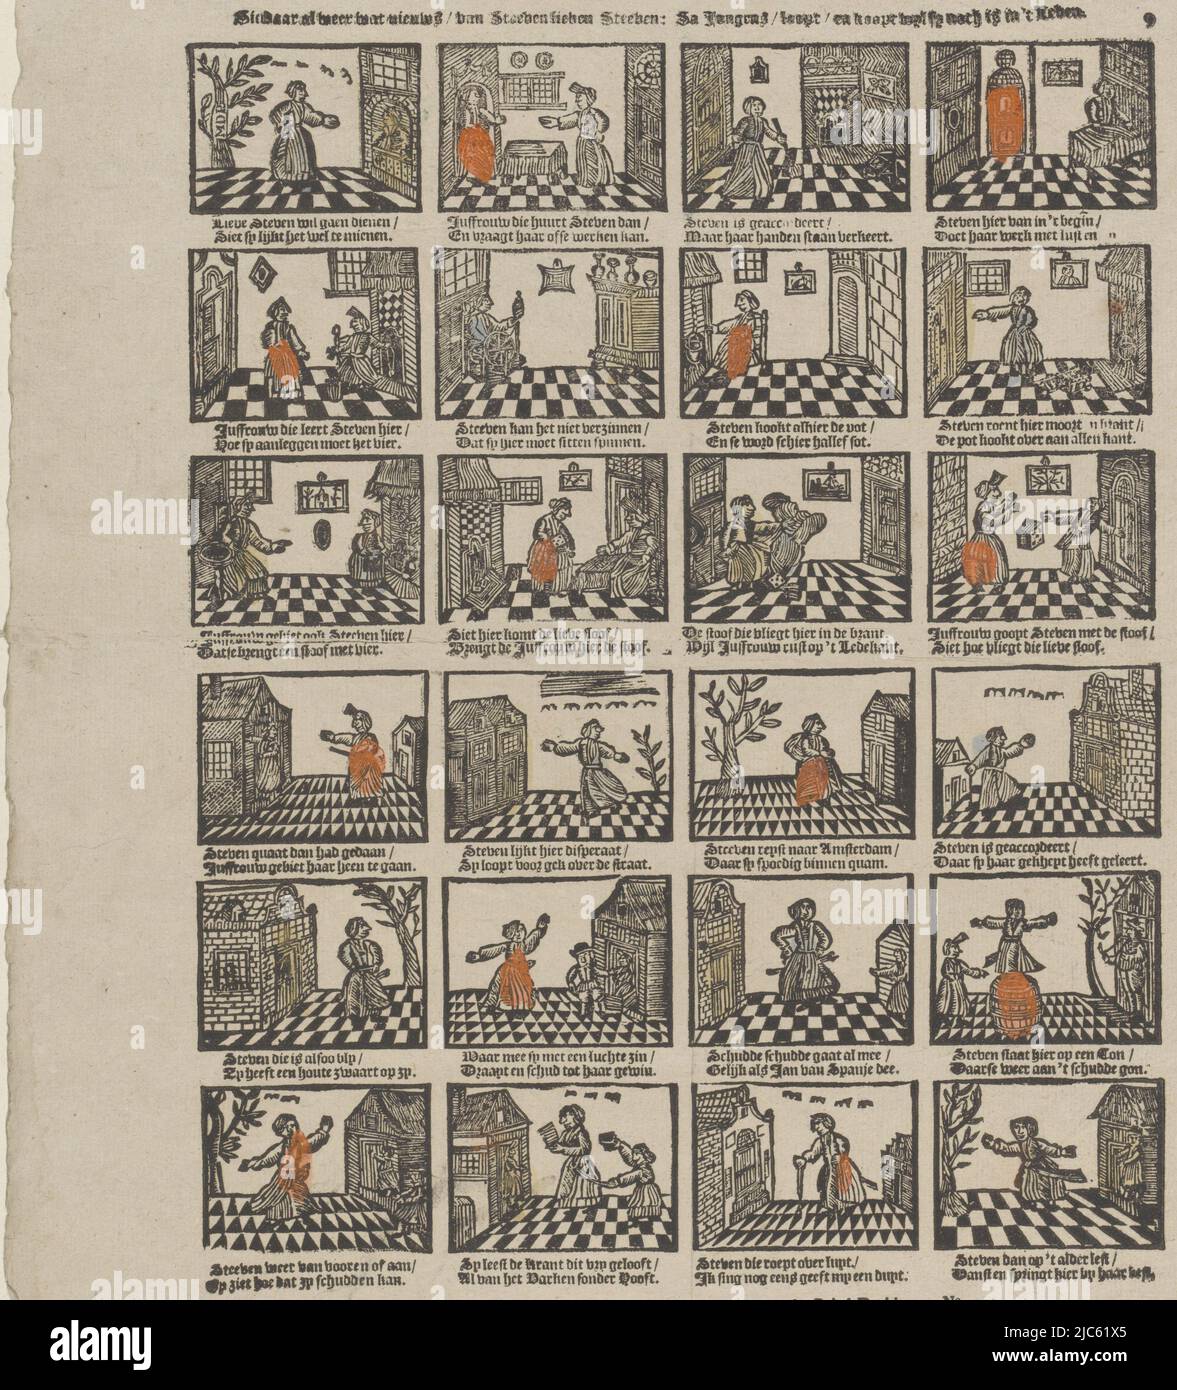 Sheet with 24 representations from the life of Steven the maid. Below each scene a two-line verse. Numbered top right: 9., Sie daar al weer wat nieuws / van Steeven lieven Steeven: Sa boys / buys / and buys wyl sy noch is in 't leven , publisher: David le Jolle, (mentioned on object), print maker: anonymous, publisher: Amsterdam, print maker: Netherlands, 1814 - 1820, paper, letterpress printing, h 413 mm × w 327 mm Stock Photo